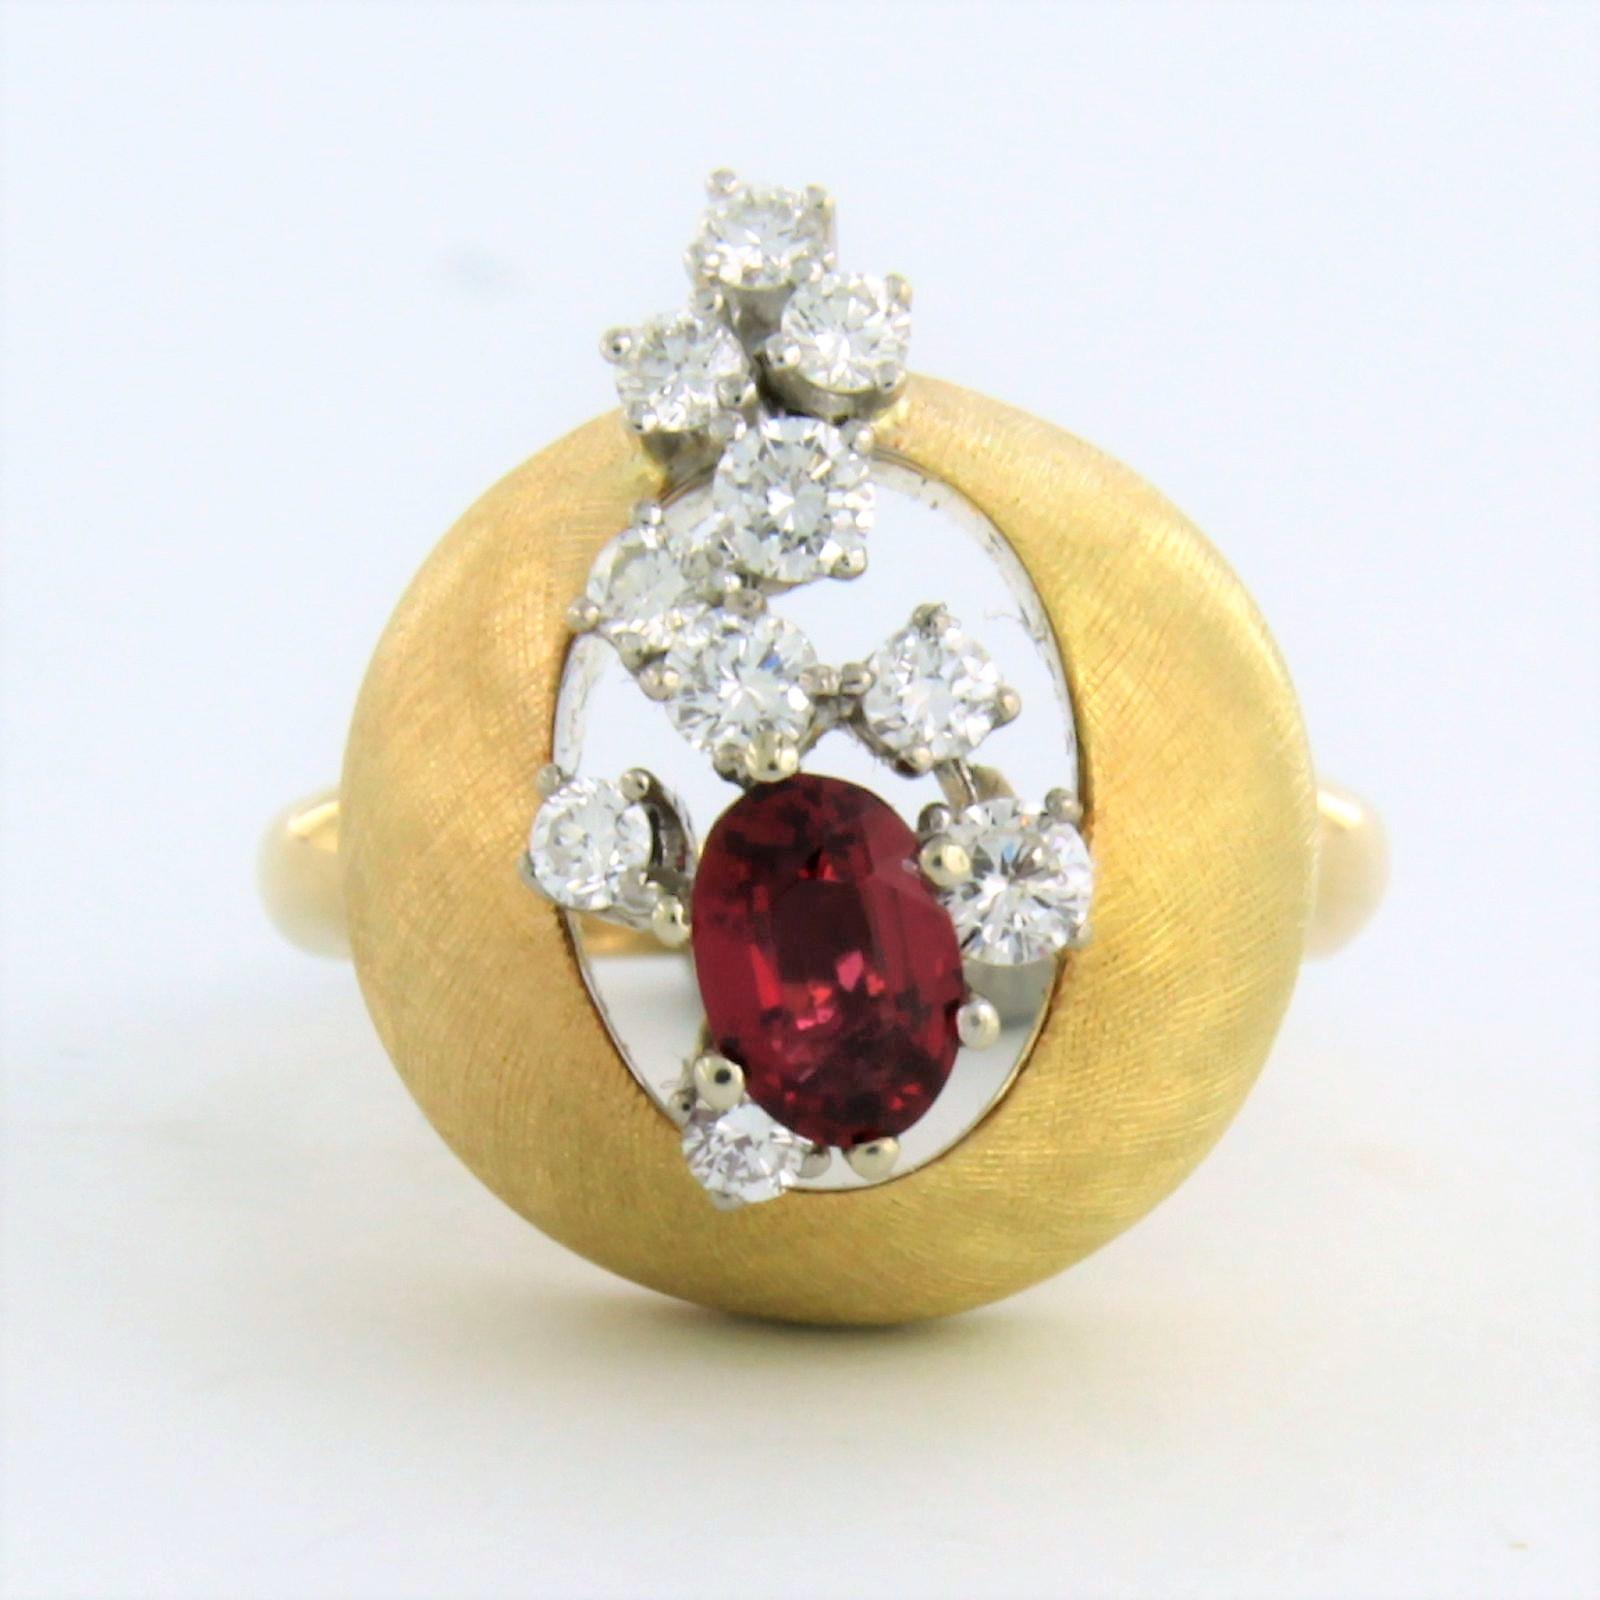 18k bicolor gold ring set with ruby ​​and brilliant cut diamond. 0.40ct - F/G - VS/SI - ring size U.S. 5.75 - EU. 16.25(51)

Detailed description

The top of the ring is 1.6 cm wide and 1.1 cm high

Weight 14.3 grams

ring size U.S. 5.75 - EU.